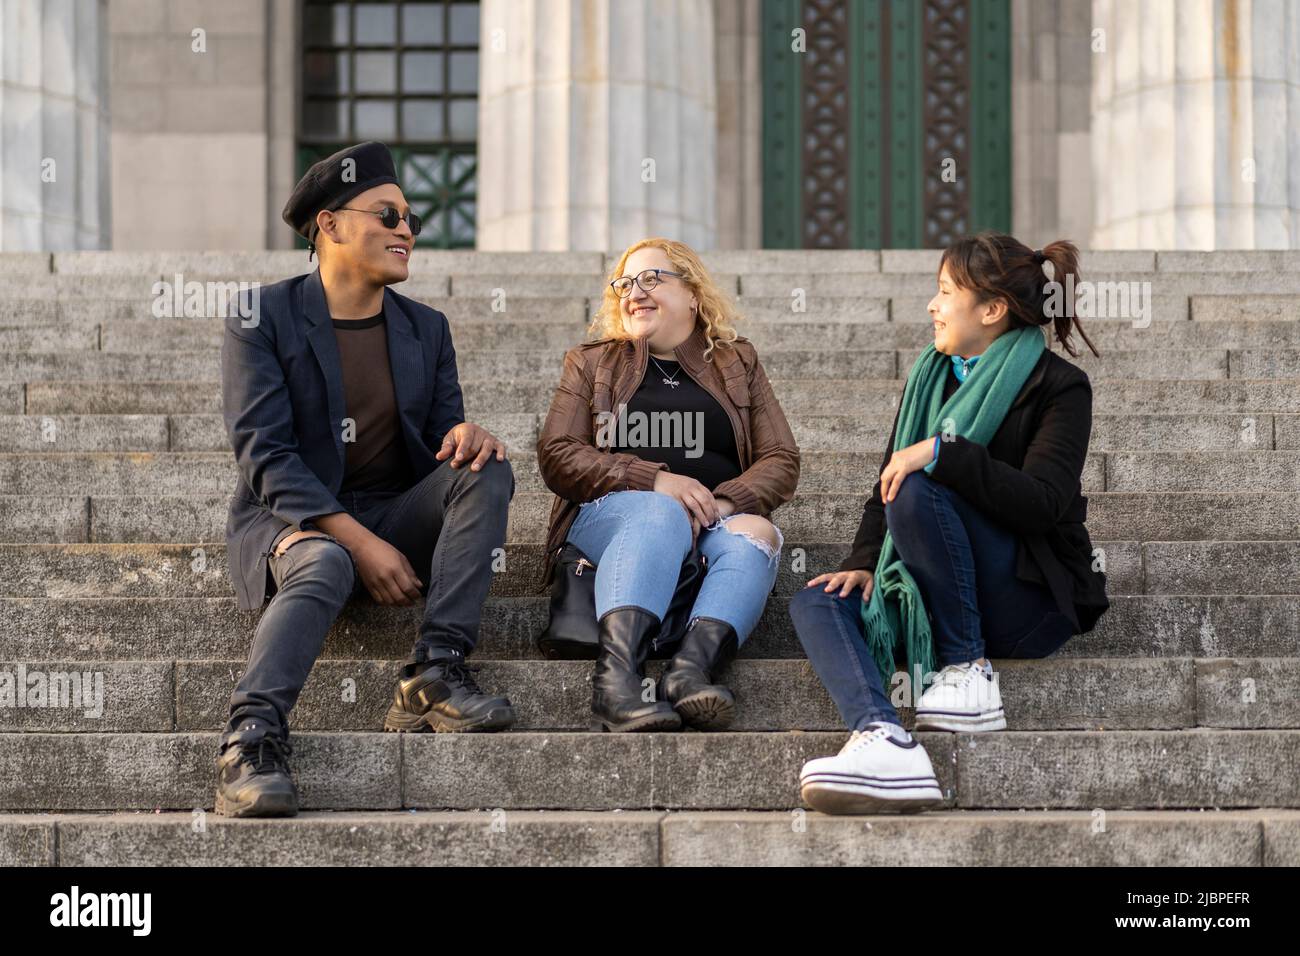 Multi ethnic group of friends sitting on some stairs having a good time chatting and laughing Stock Photo